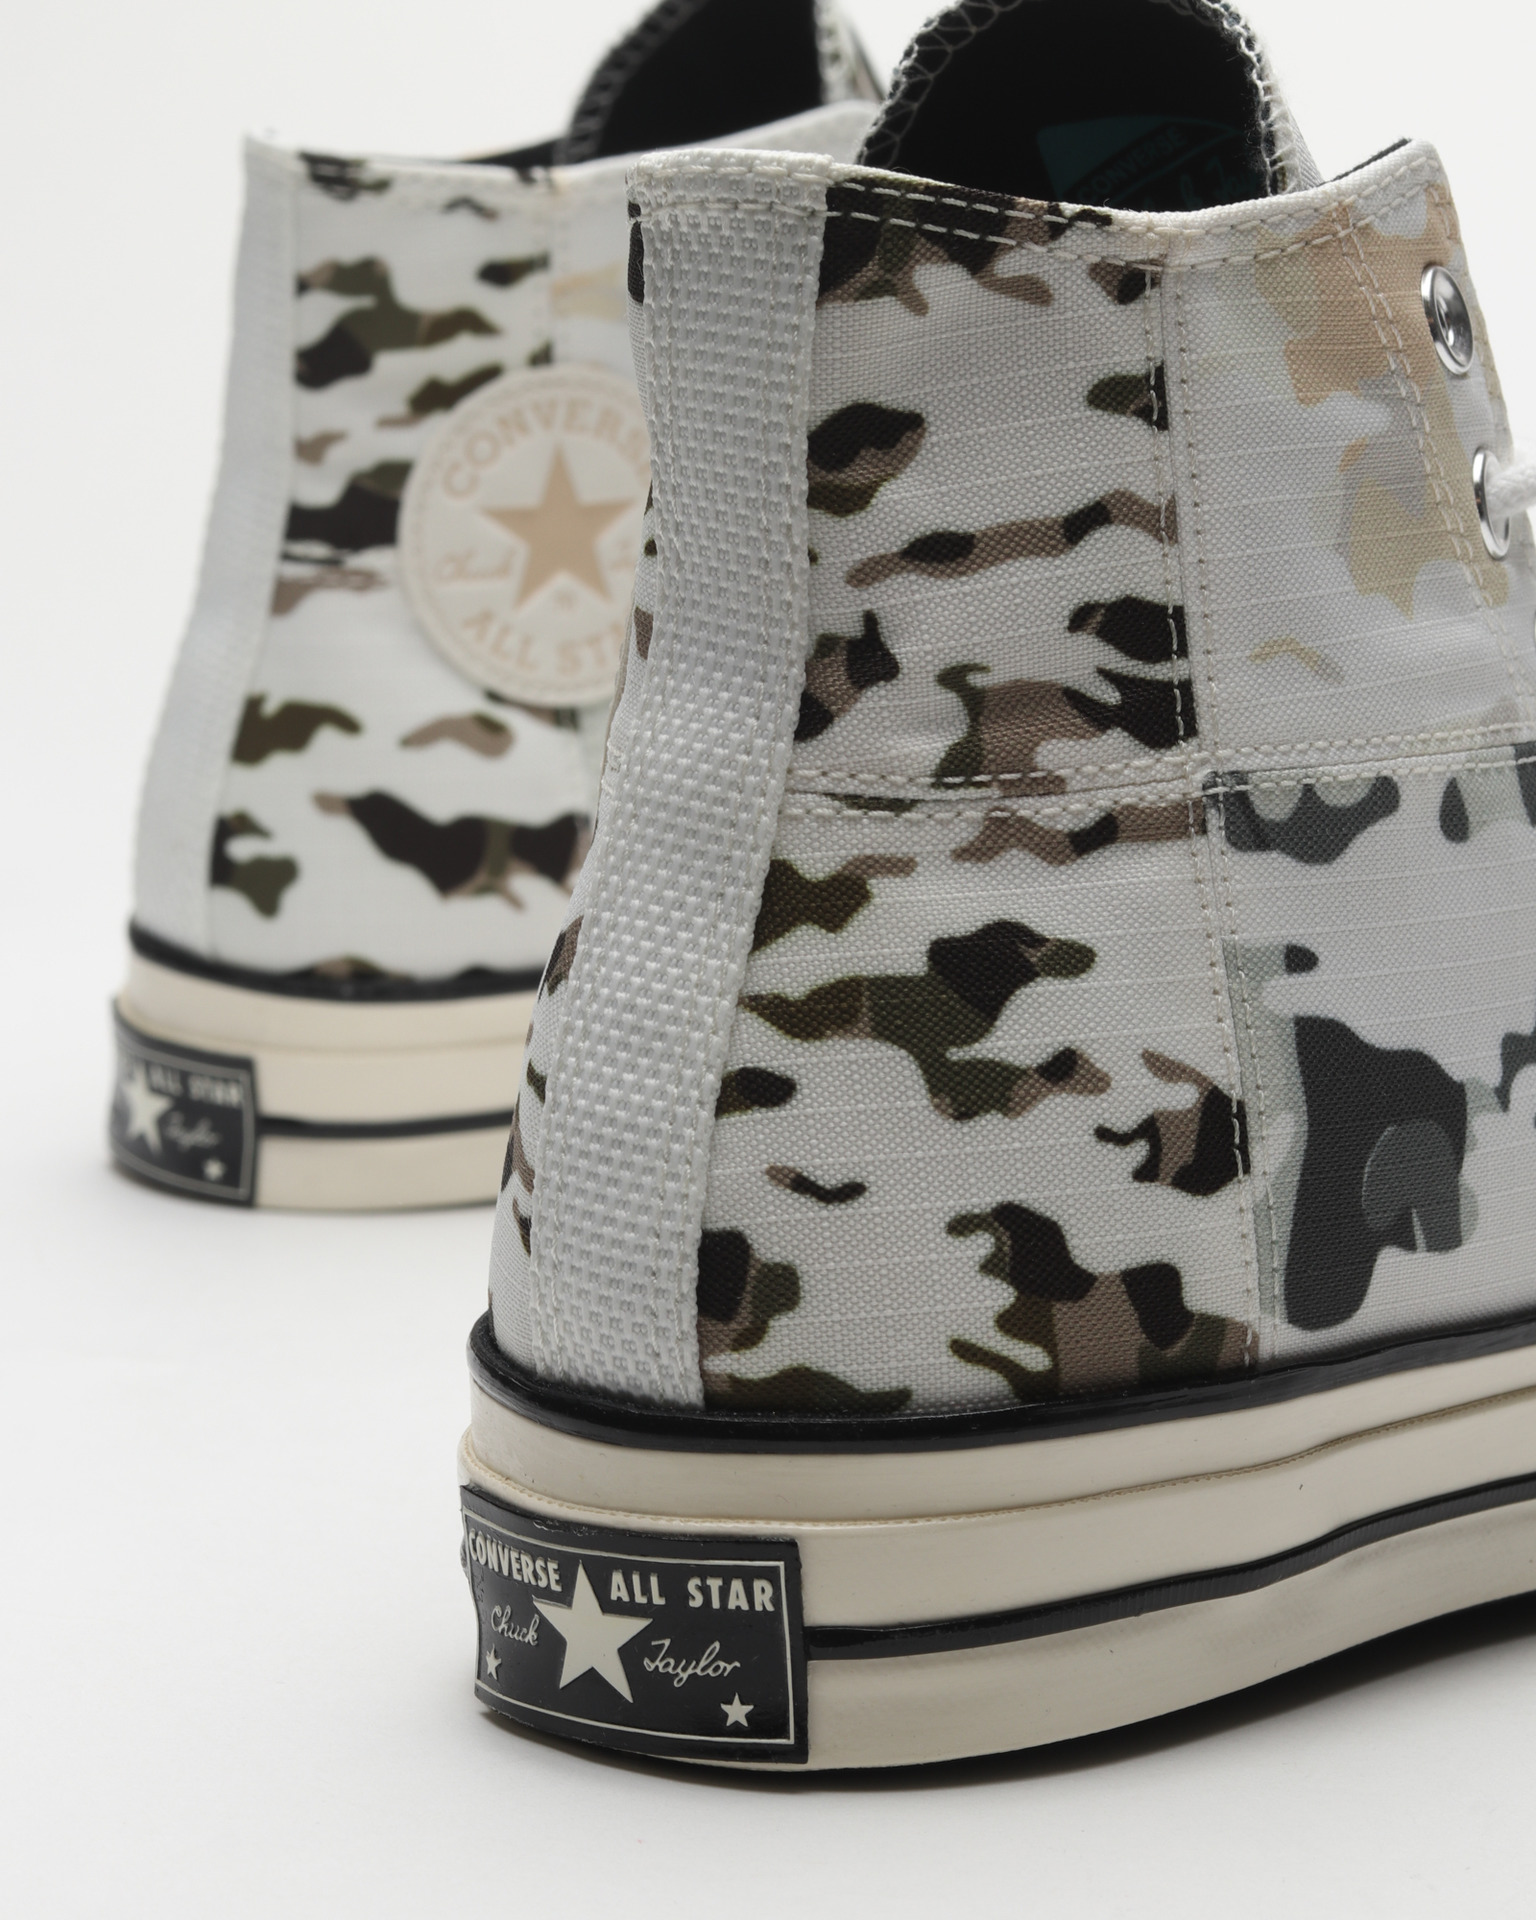 Converse Mens 10 / Women's 12 One Star Chuck Taylor Camo Camouflage Low  Sneakers | eBay